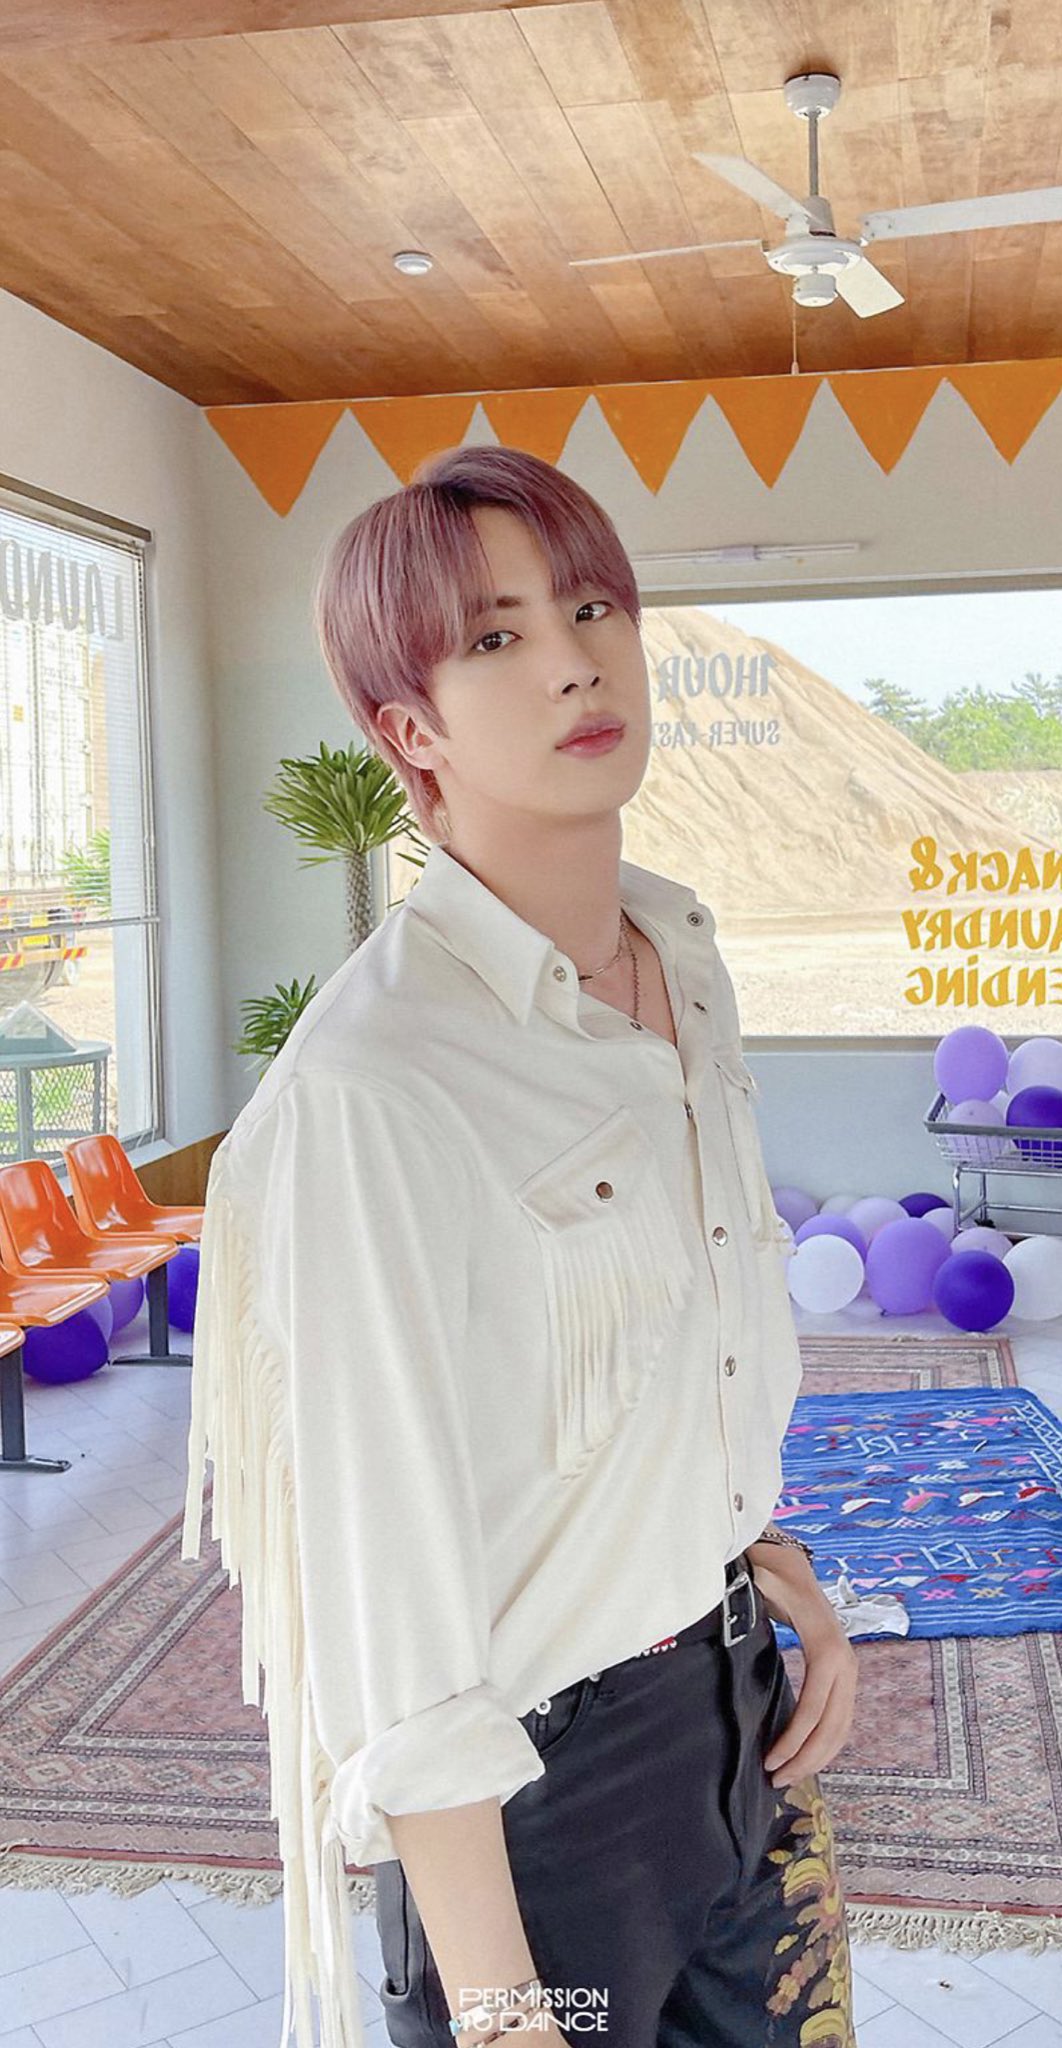 Seokjinism - THE ASTRONAUT JIN 🧑‍🚀 (Fan Account) on X: This customized white  shirt and embroidered pants- love it. Seokjin's hair color is so good for  the PTD MV #방탄소년단진 #JIN #BTSJIN #